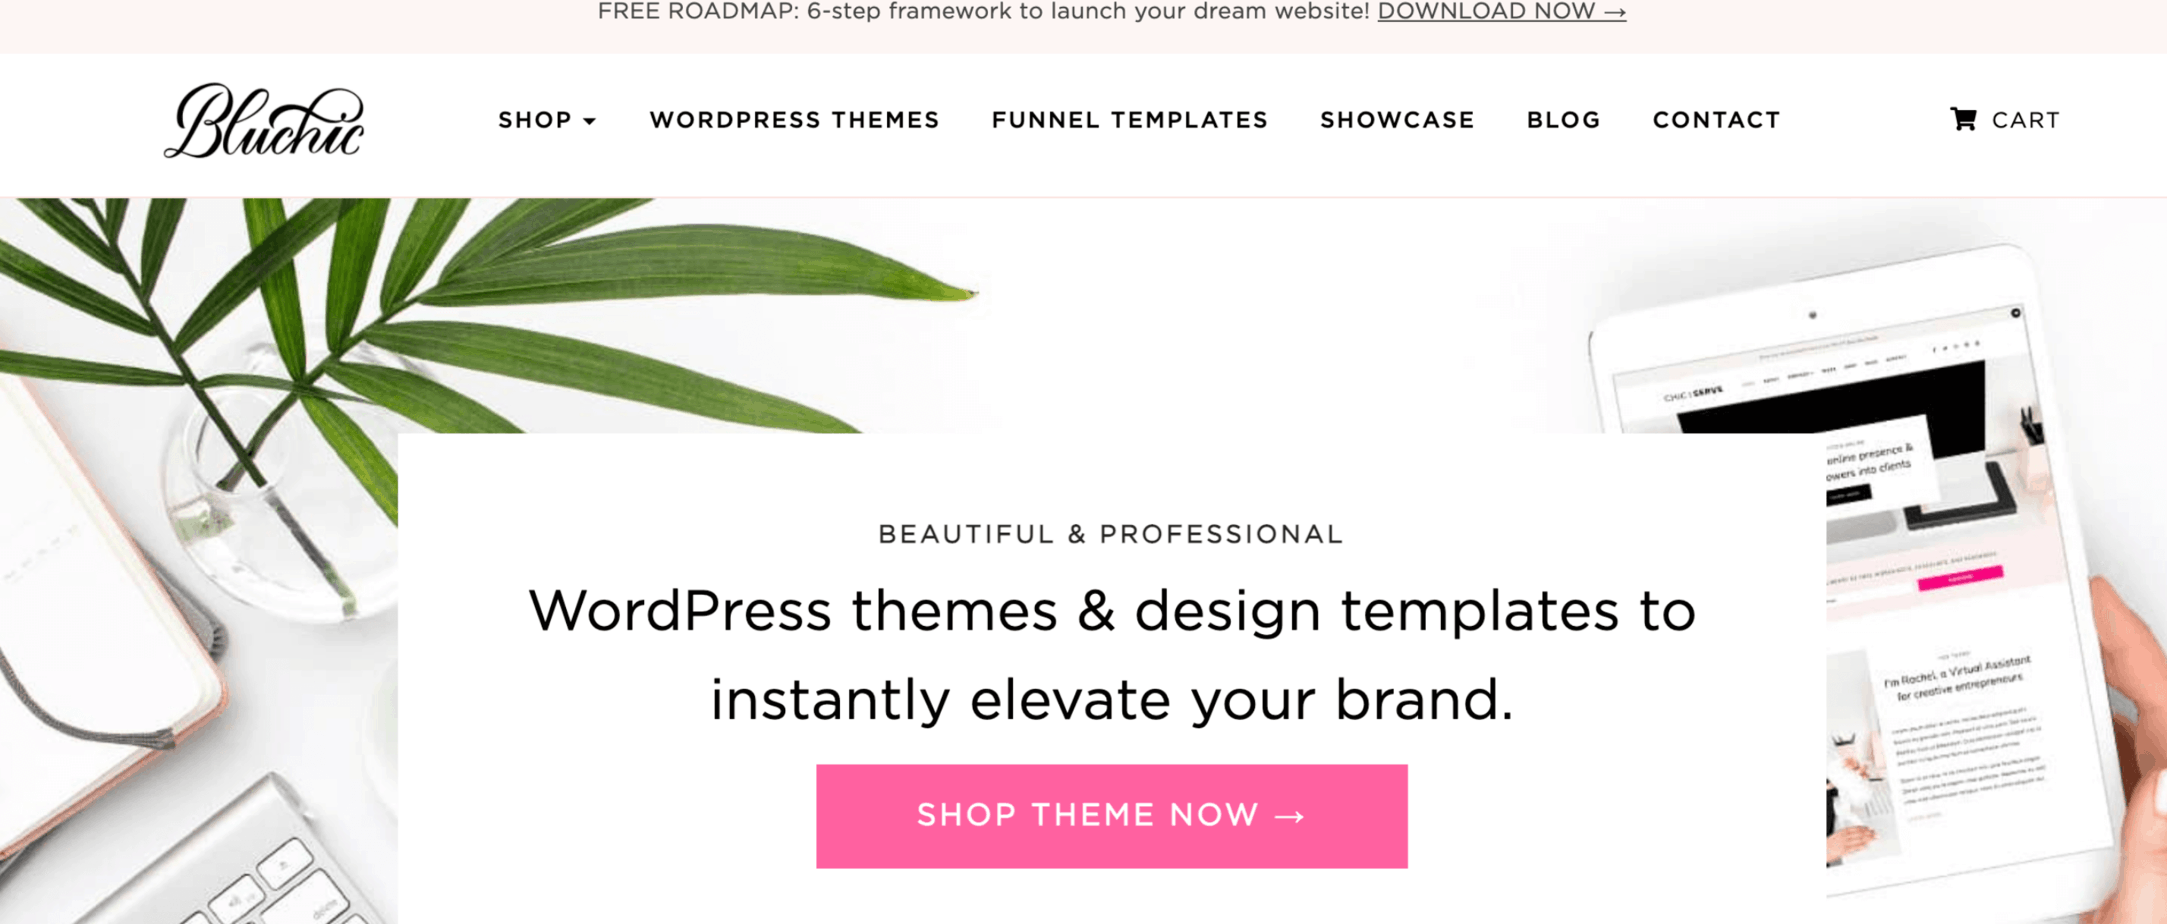 Bluchic WordPress themes with feminine designs that look professional and beautiful - all are fully responsive.